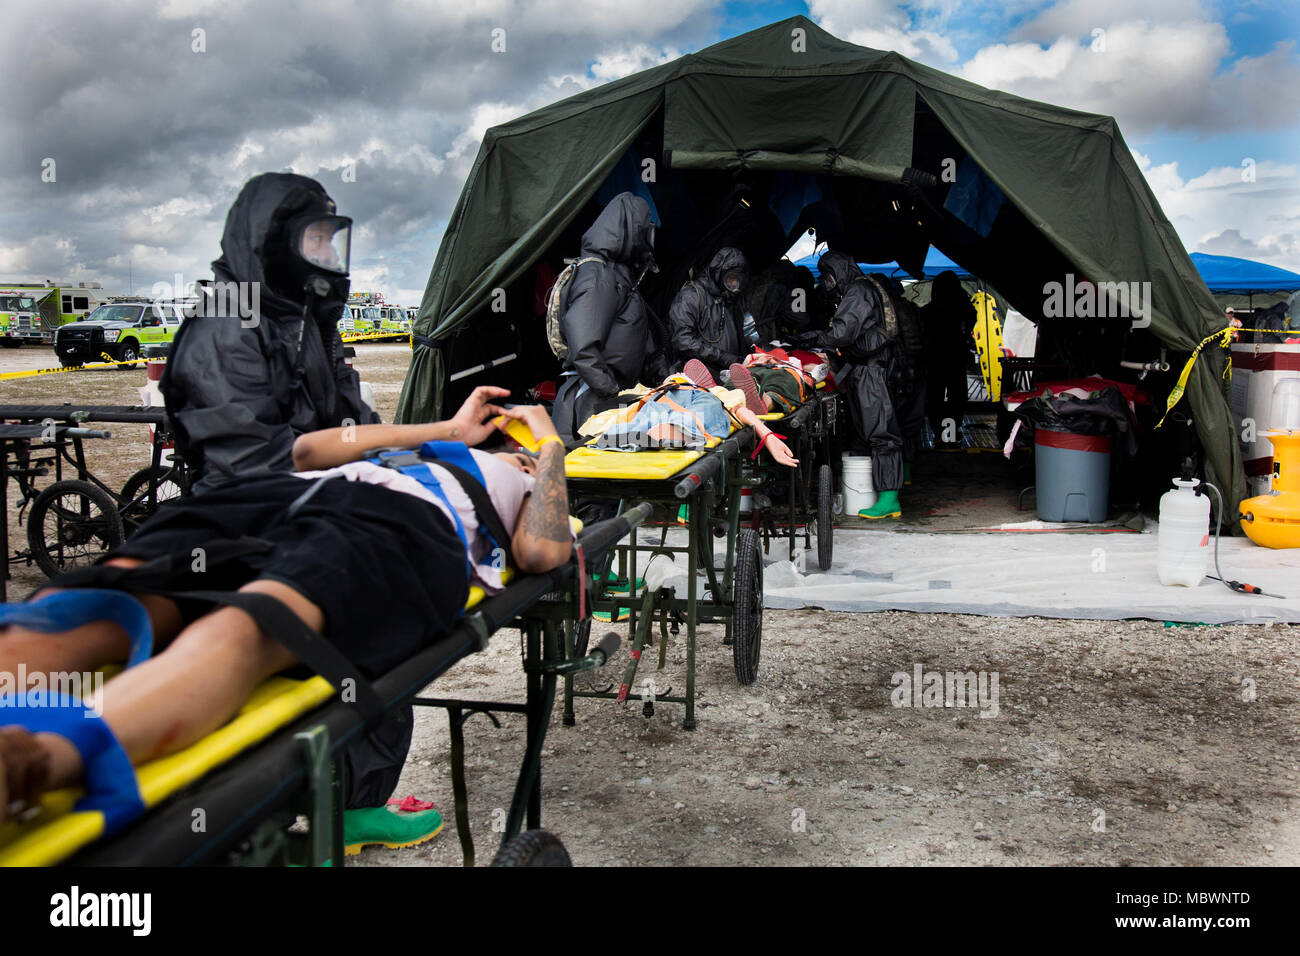 U.S. Army Soldiers of the 414th Chemical Company, exercise a decontamination for a simulated mass chemical attack during a Joint Training Exercise hosted by the Miami-Dade Fire Department and Homestead-Miami Speedway in Miami, Fla. Jan. 11, 2018. This JTE focused on building response capabilities and seamless the transition between the local first responders and the follow-on support provided by the National Guard and Active duty soldiers. (U. S. Army Photo by Spc. P.J. Siquig) Stock Photo